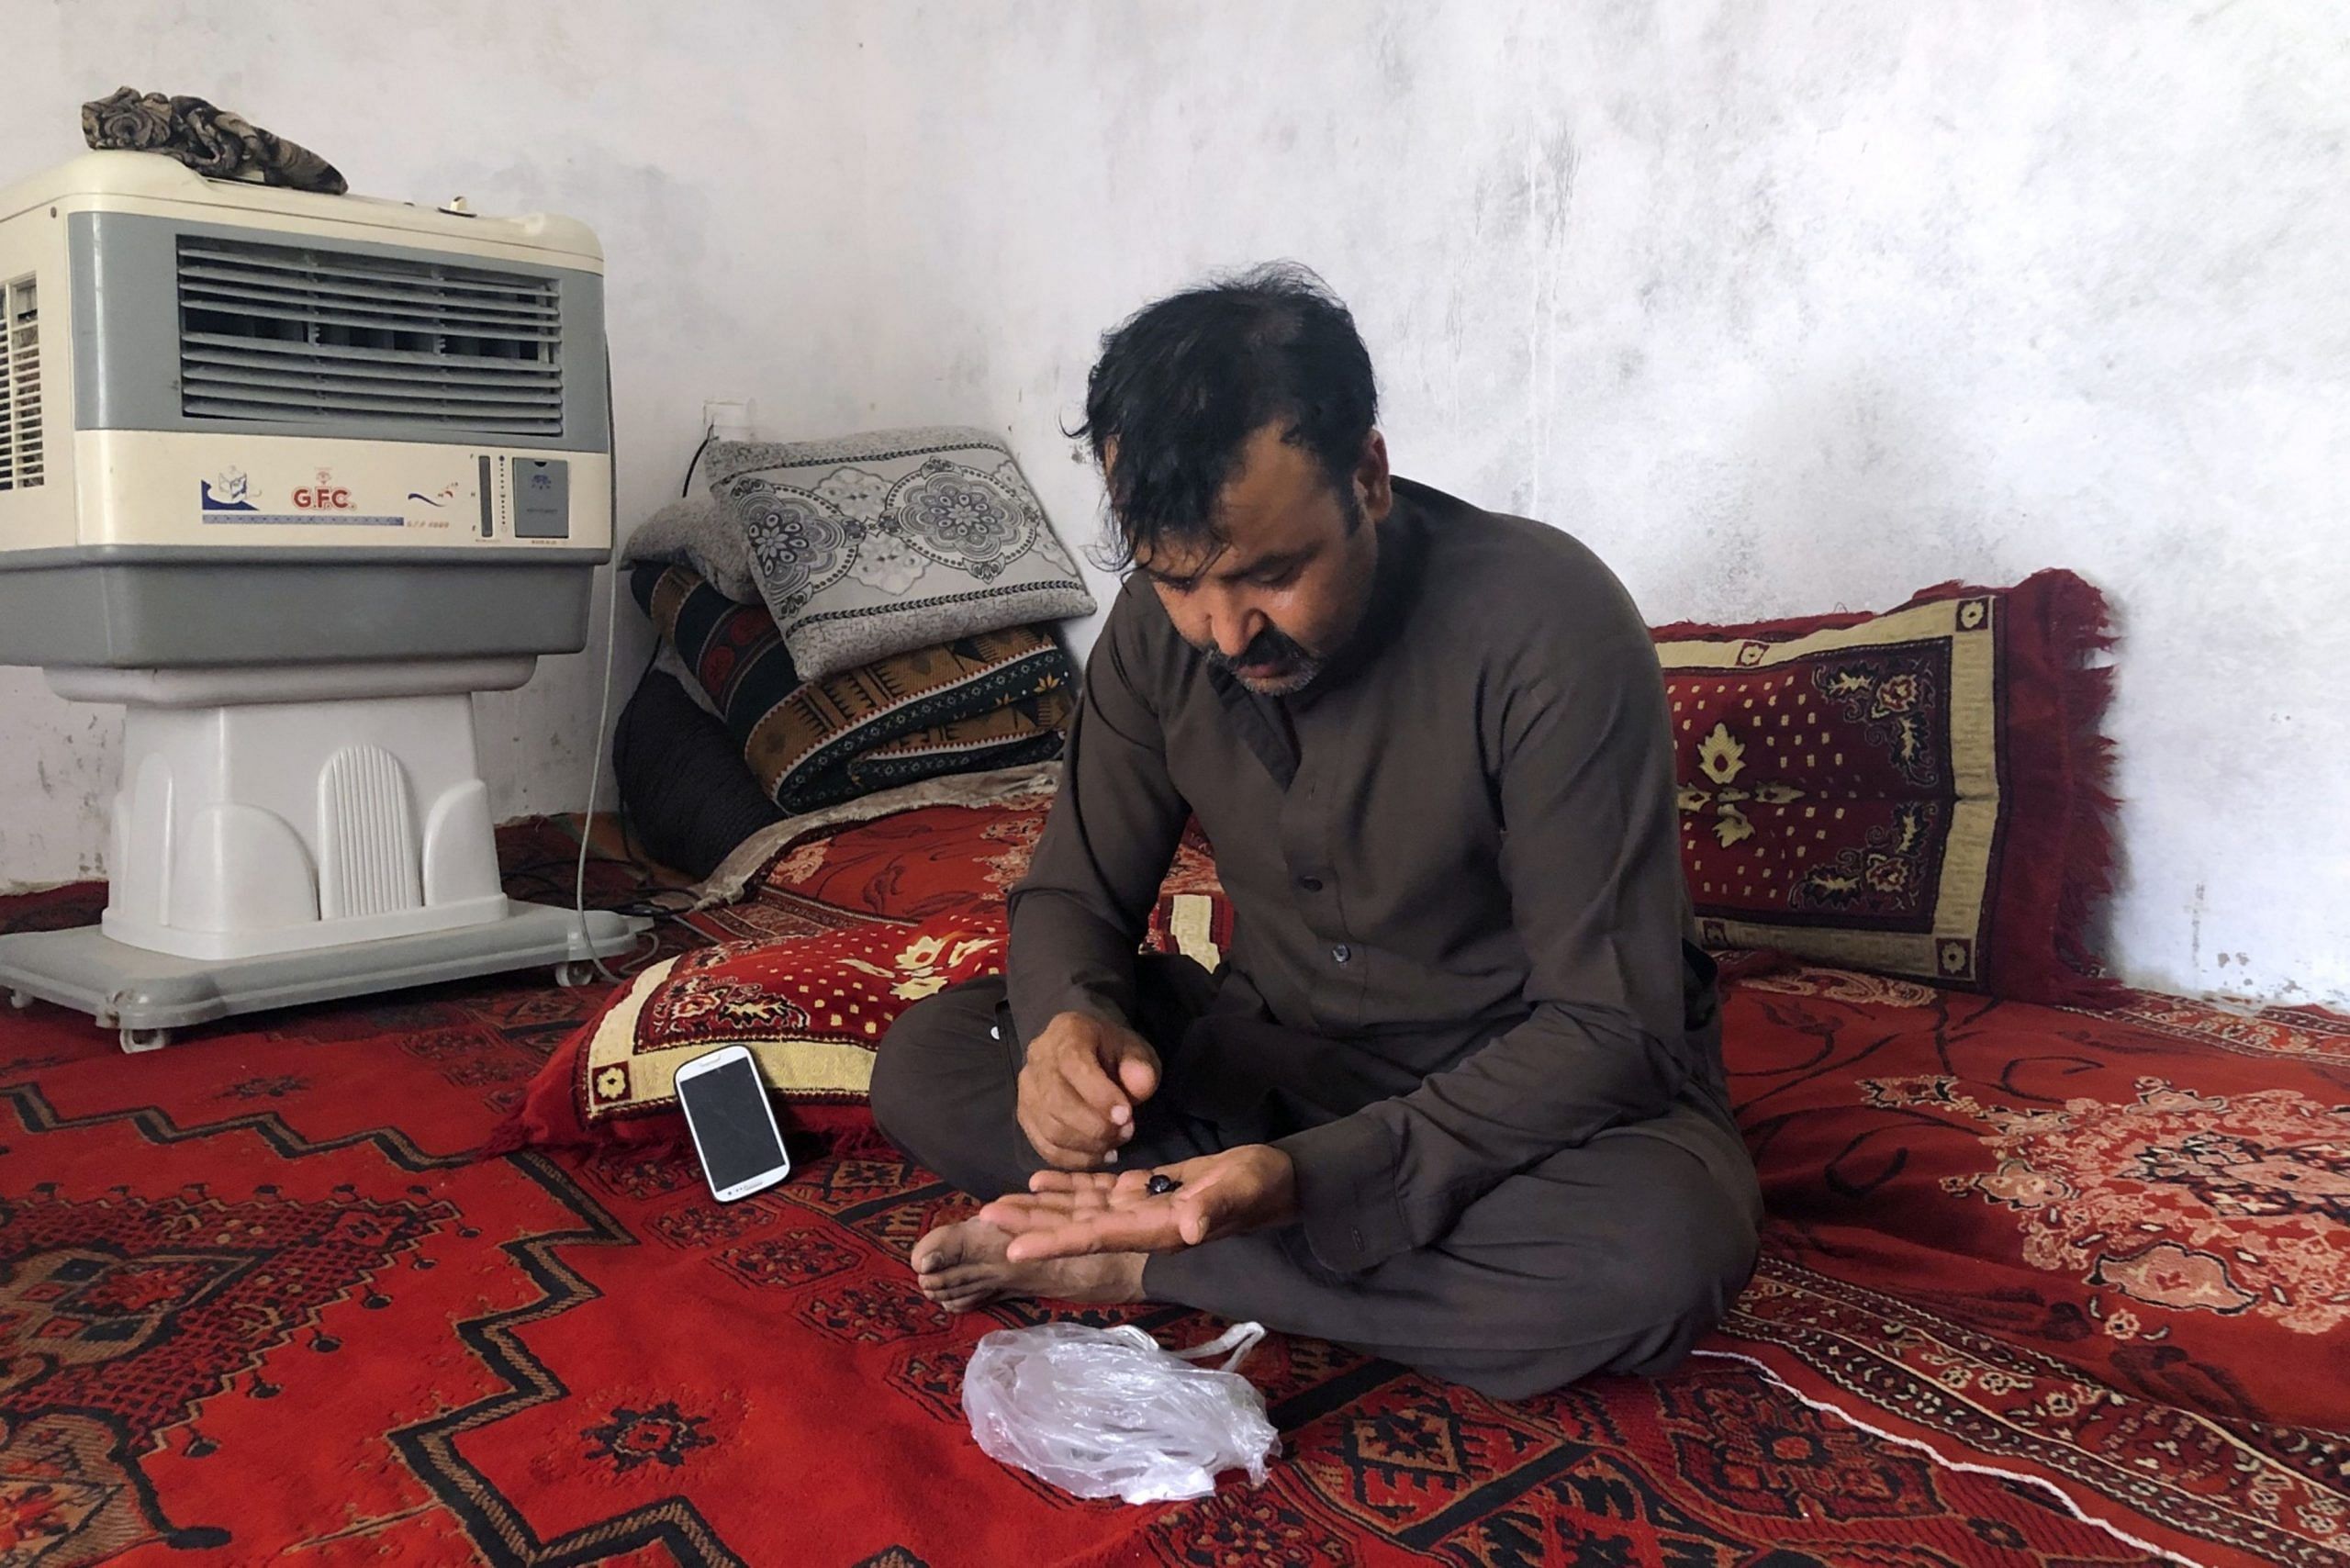 Mohammad prepares opium at his home 